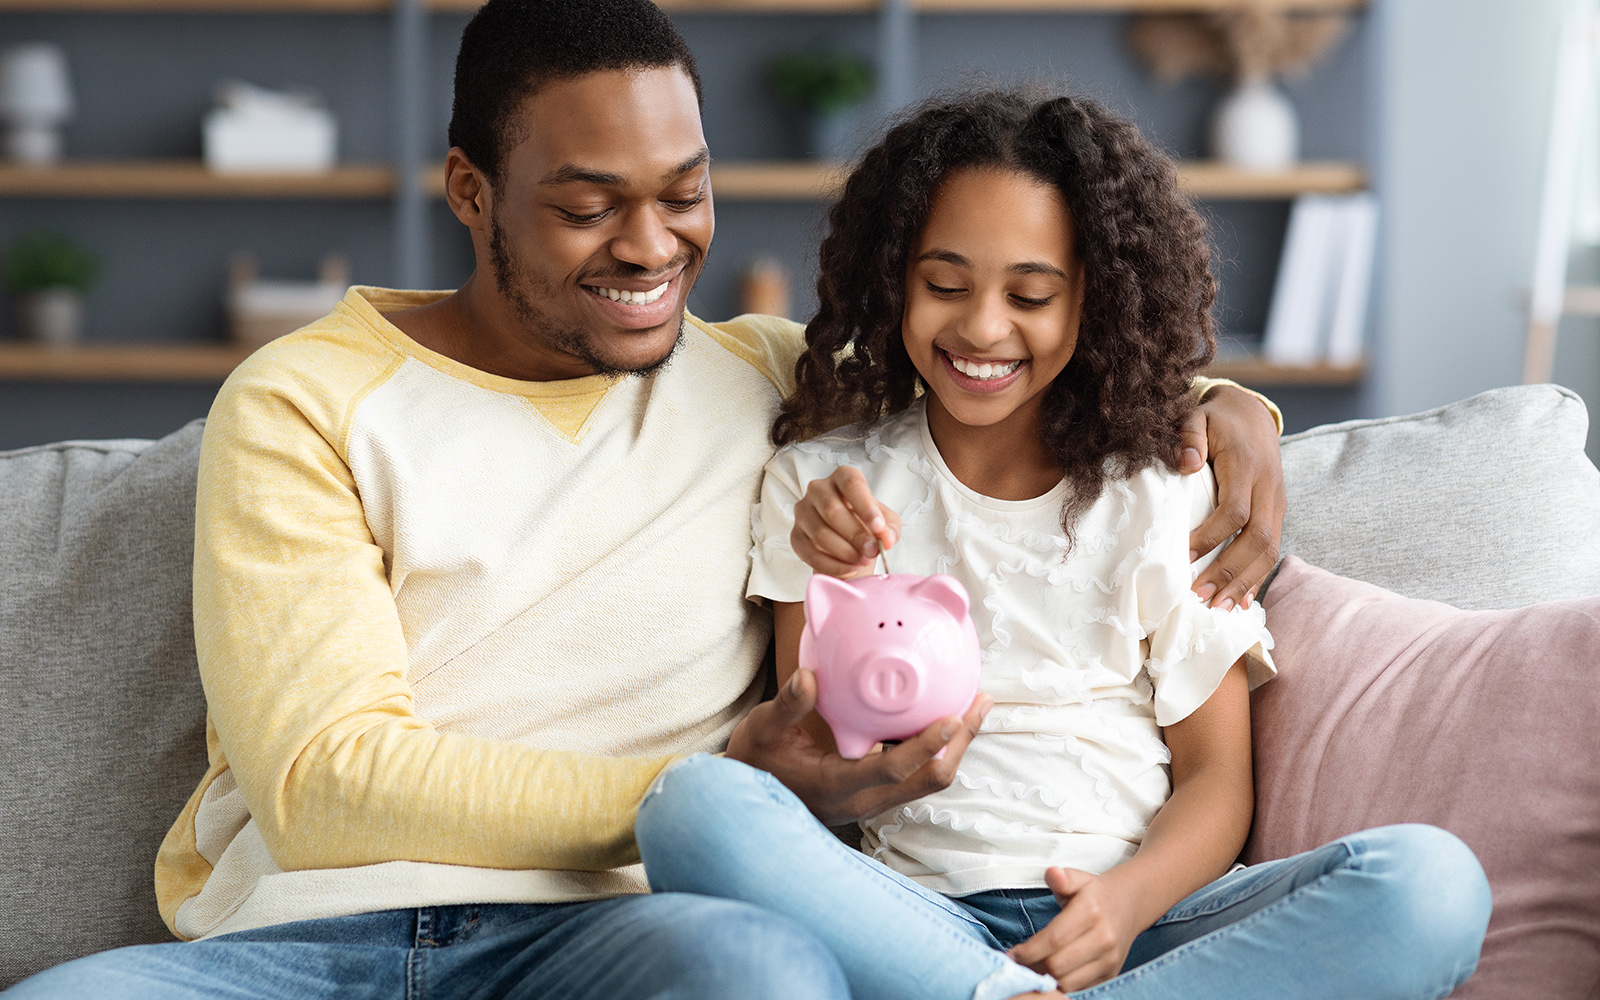 Dad and daughter looking and smiling at a piggy bank